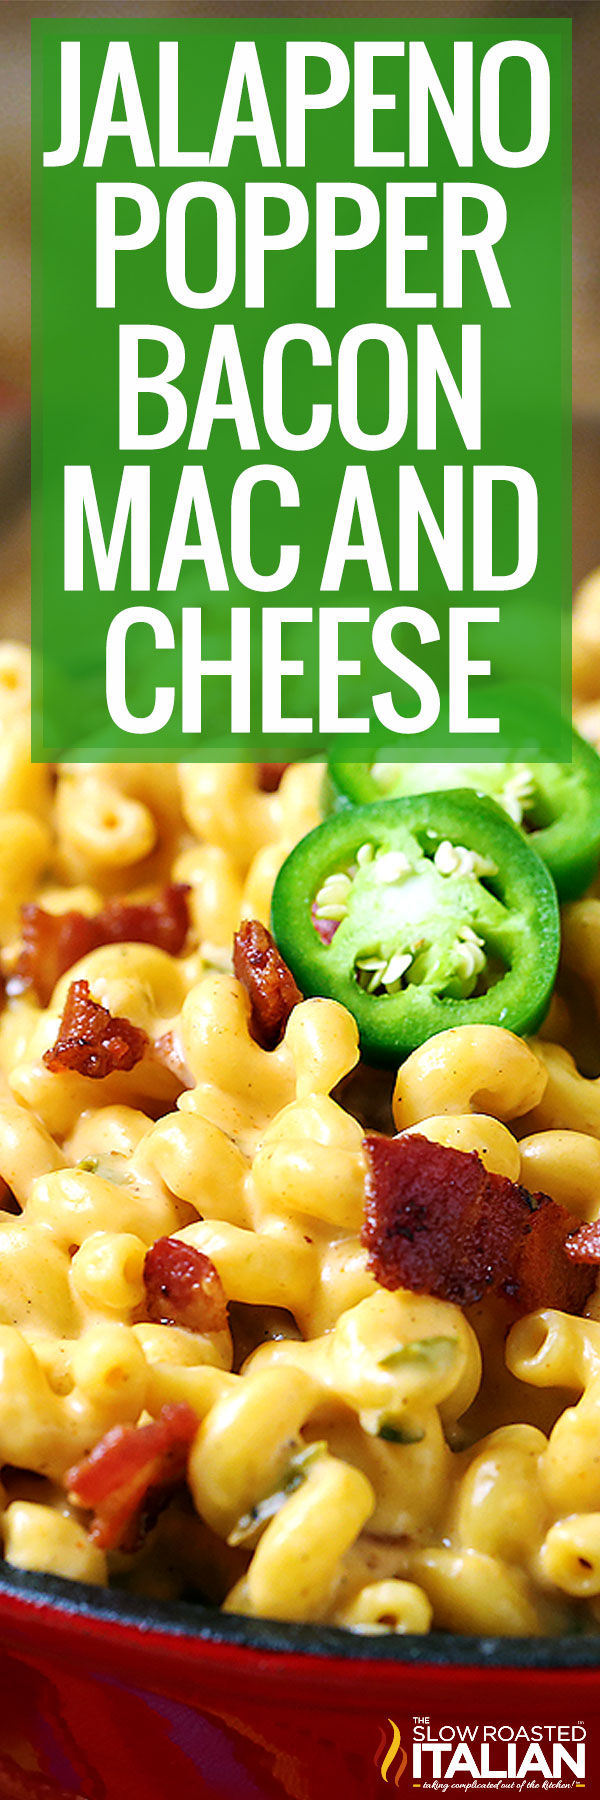 Jalapeno Popper Bacon Mac and Cheese - PIN